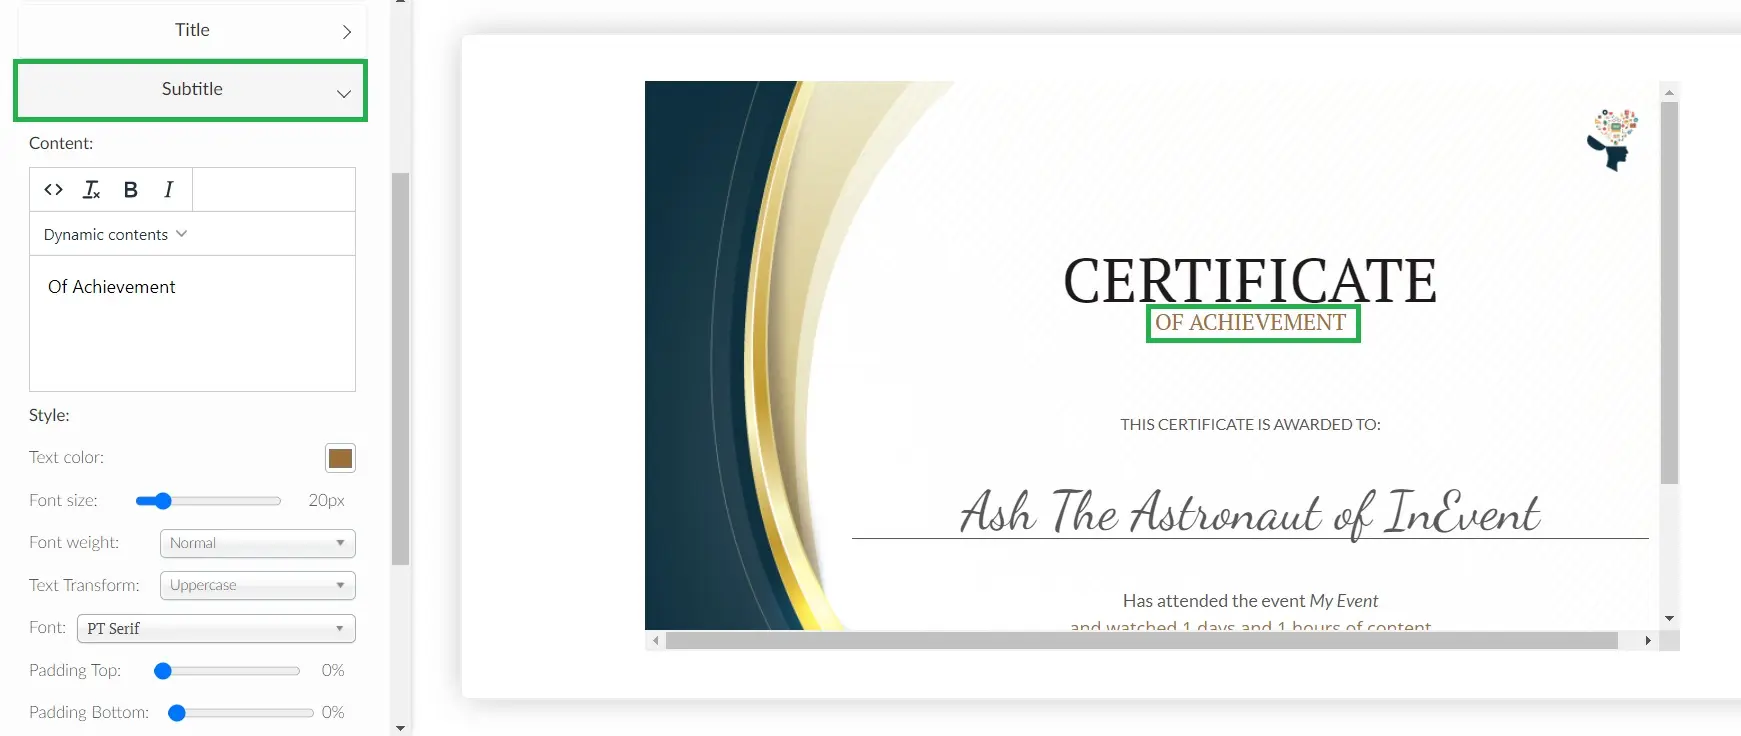 Customizing the subtitle of the certificate